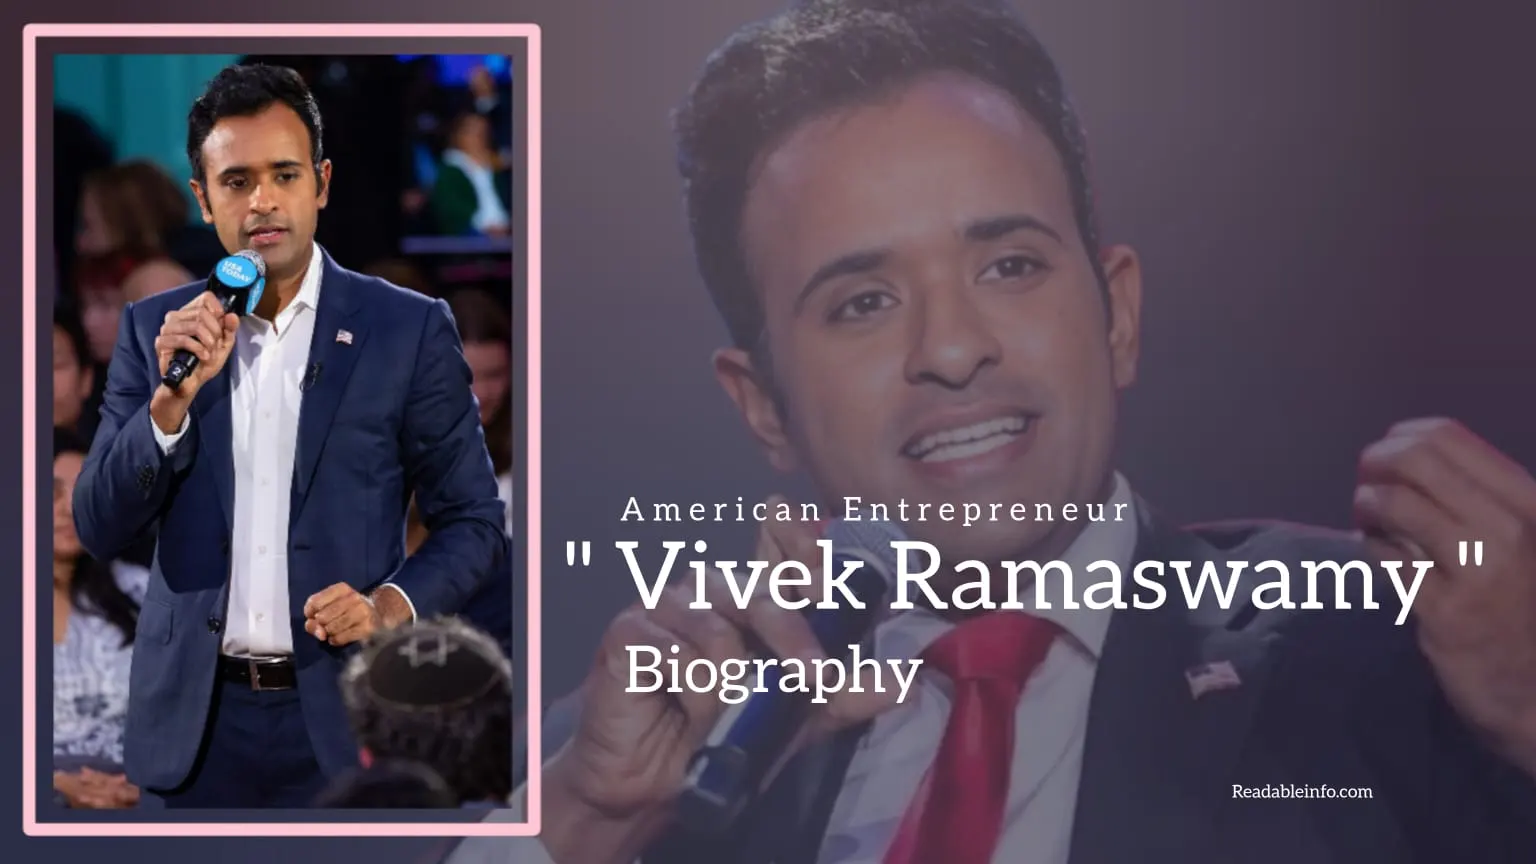 You are currently viewing Vivek Ramaswamy Biography (American Entrepreneur)